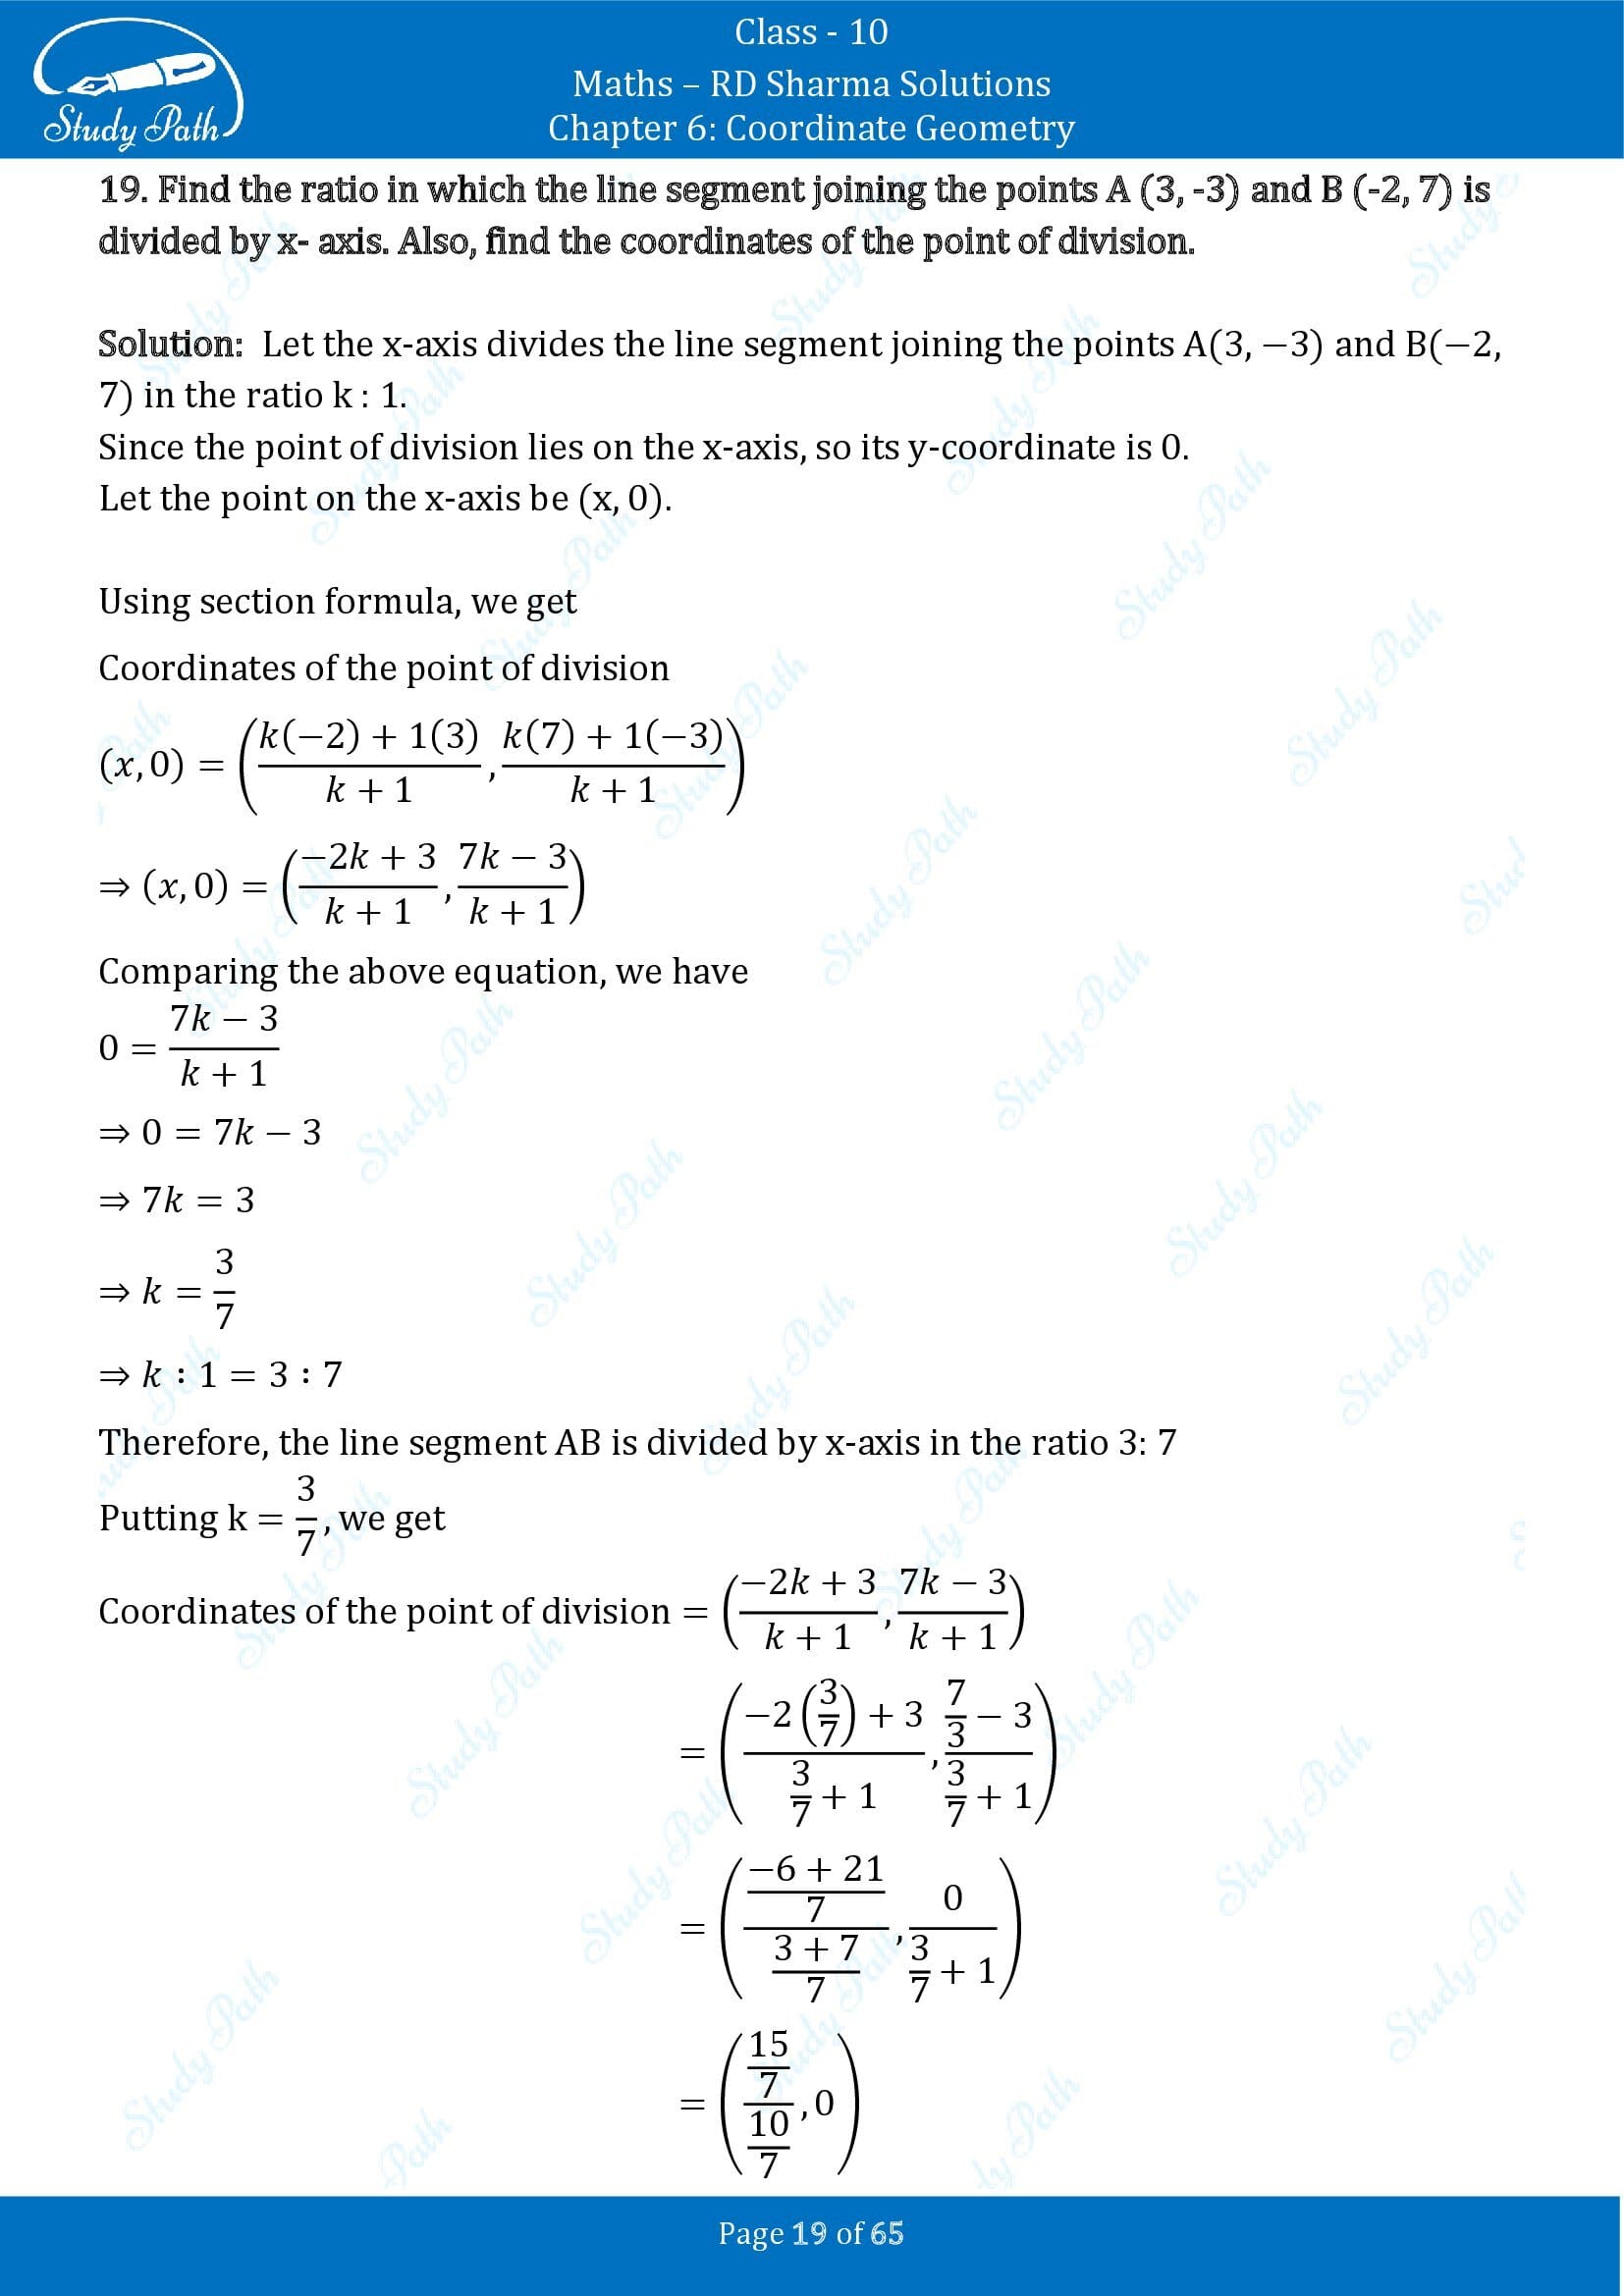 RD Sharma Solutions Class 10 Chapter 6 Coordinate Geometry Exercise 6.3 00019